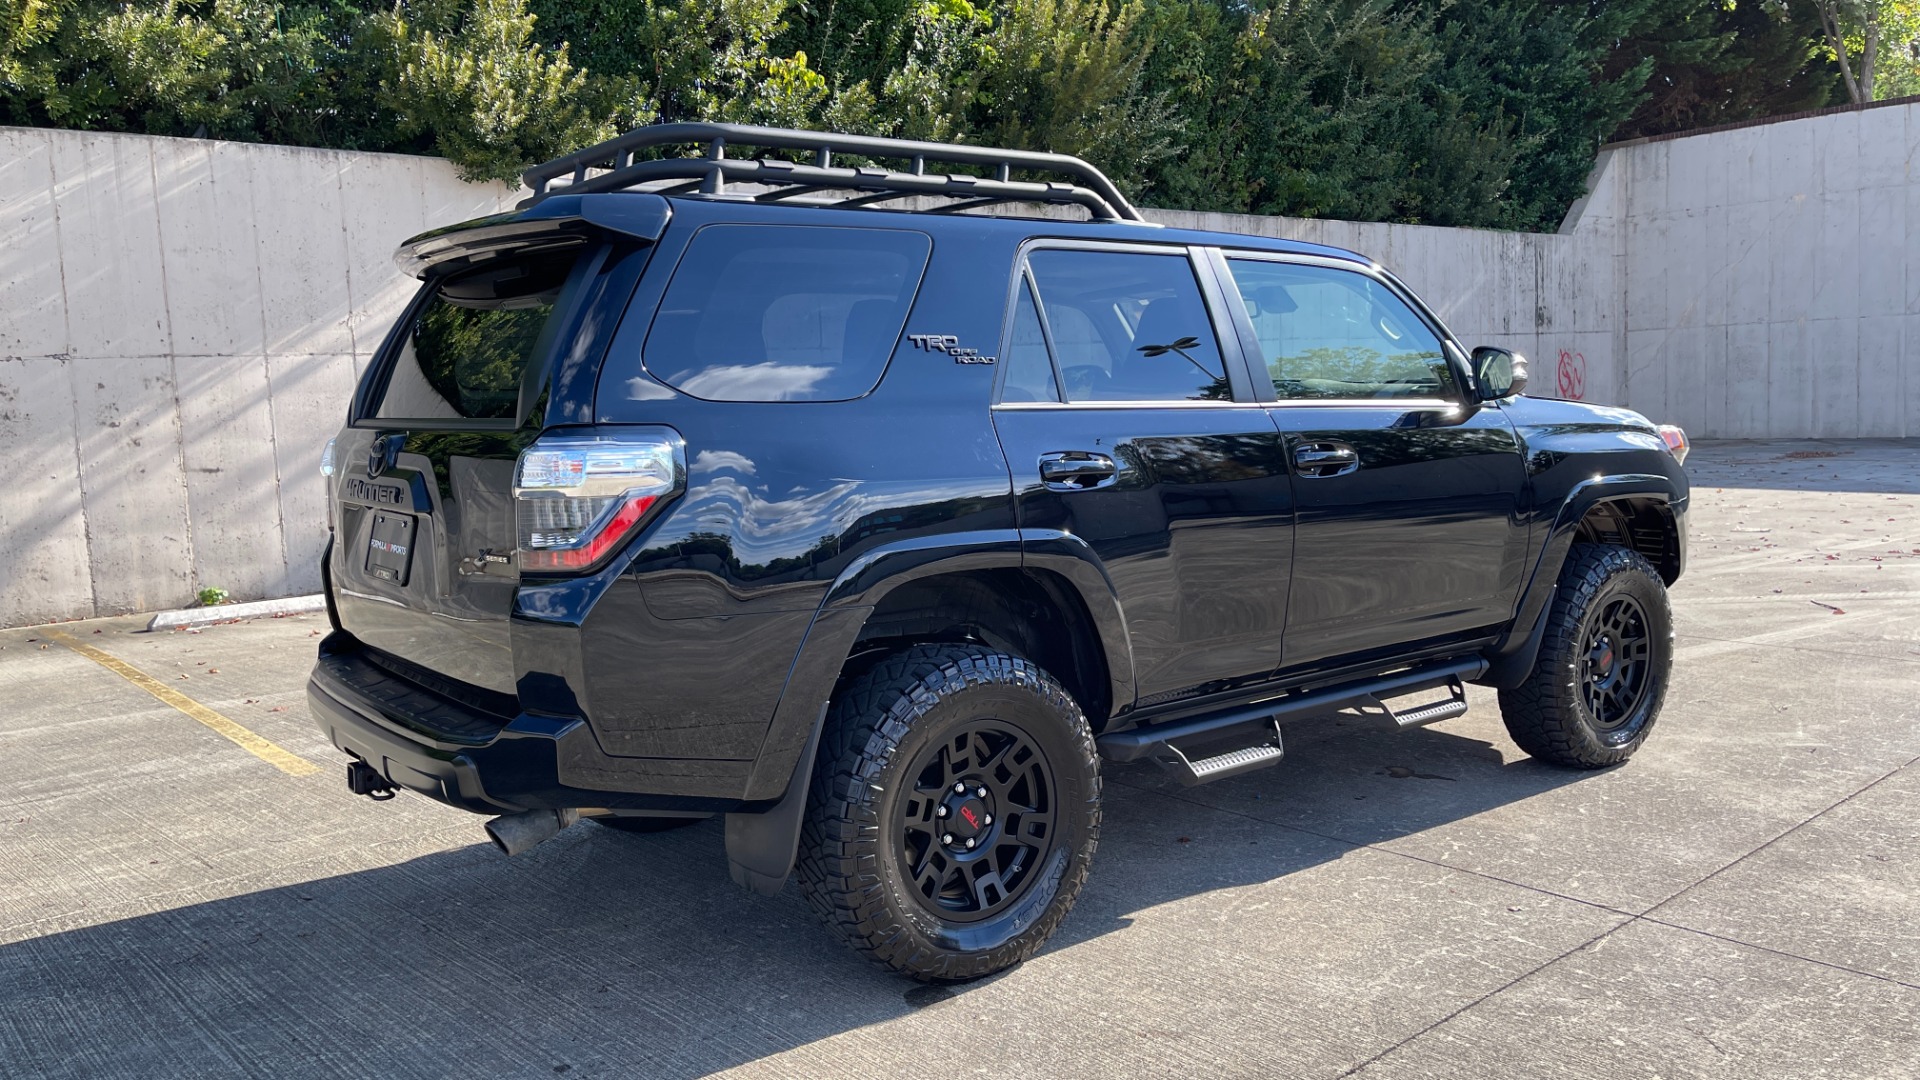 Used 2021 Toyota 4Runner TRD OFFROAD PREMIUM / KDSS SUSPENSION / XP SERIES / TRD PRO UPGRAGES / LIFT for sale $47,999 at Formula Imports in Charlotte NC 28227 4